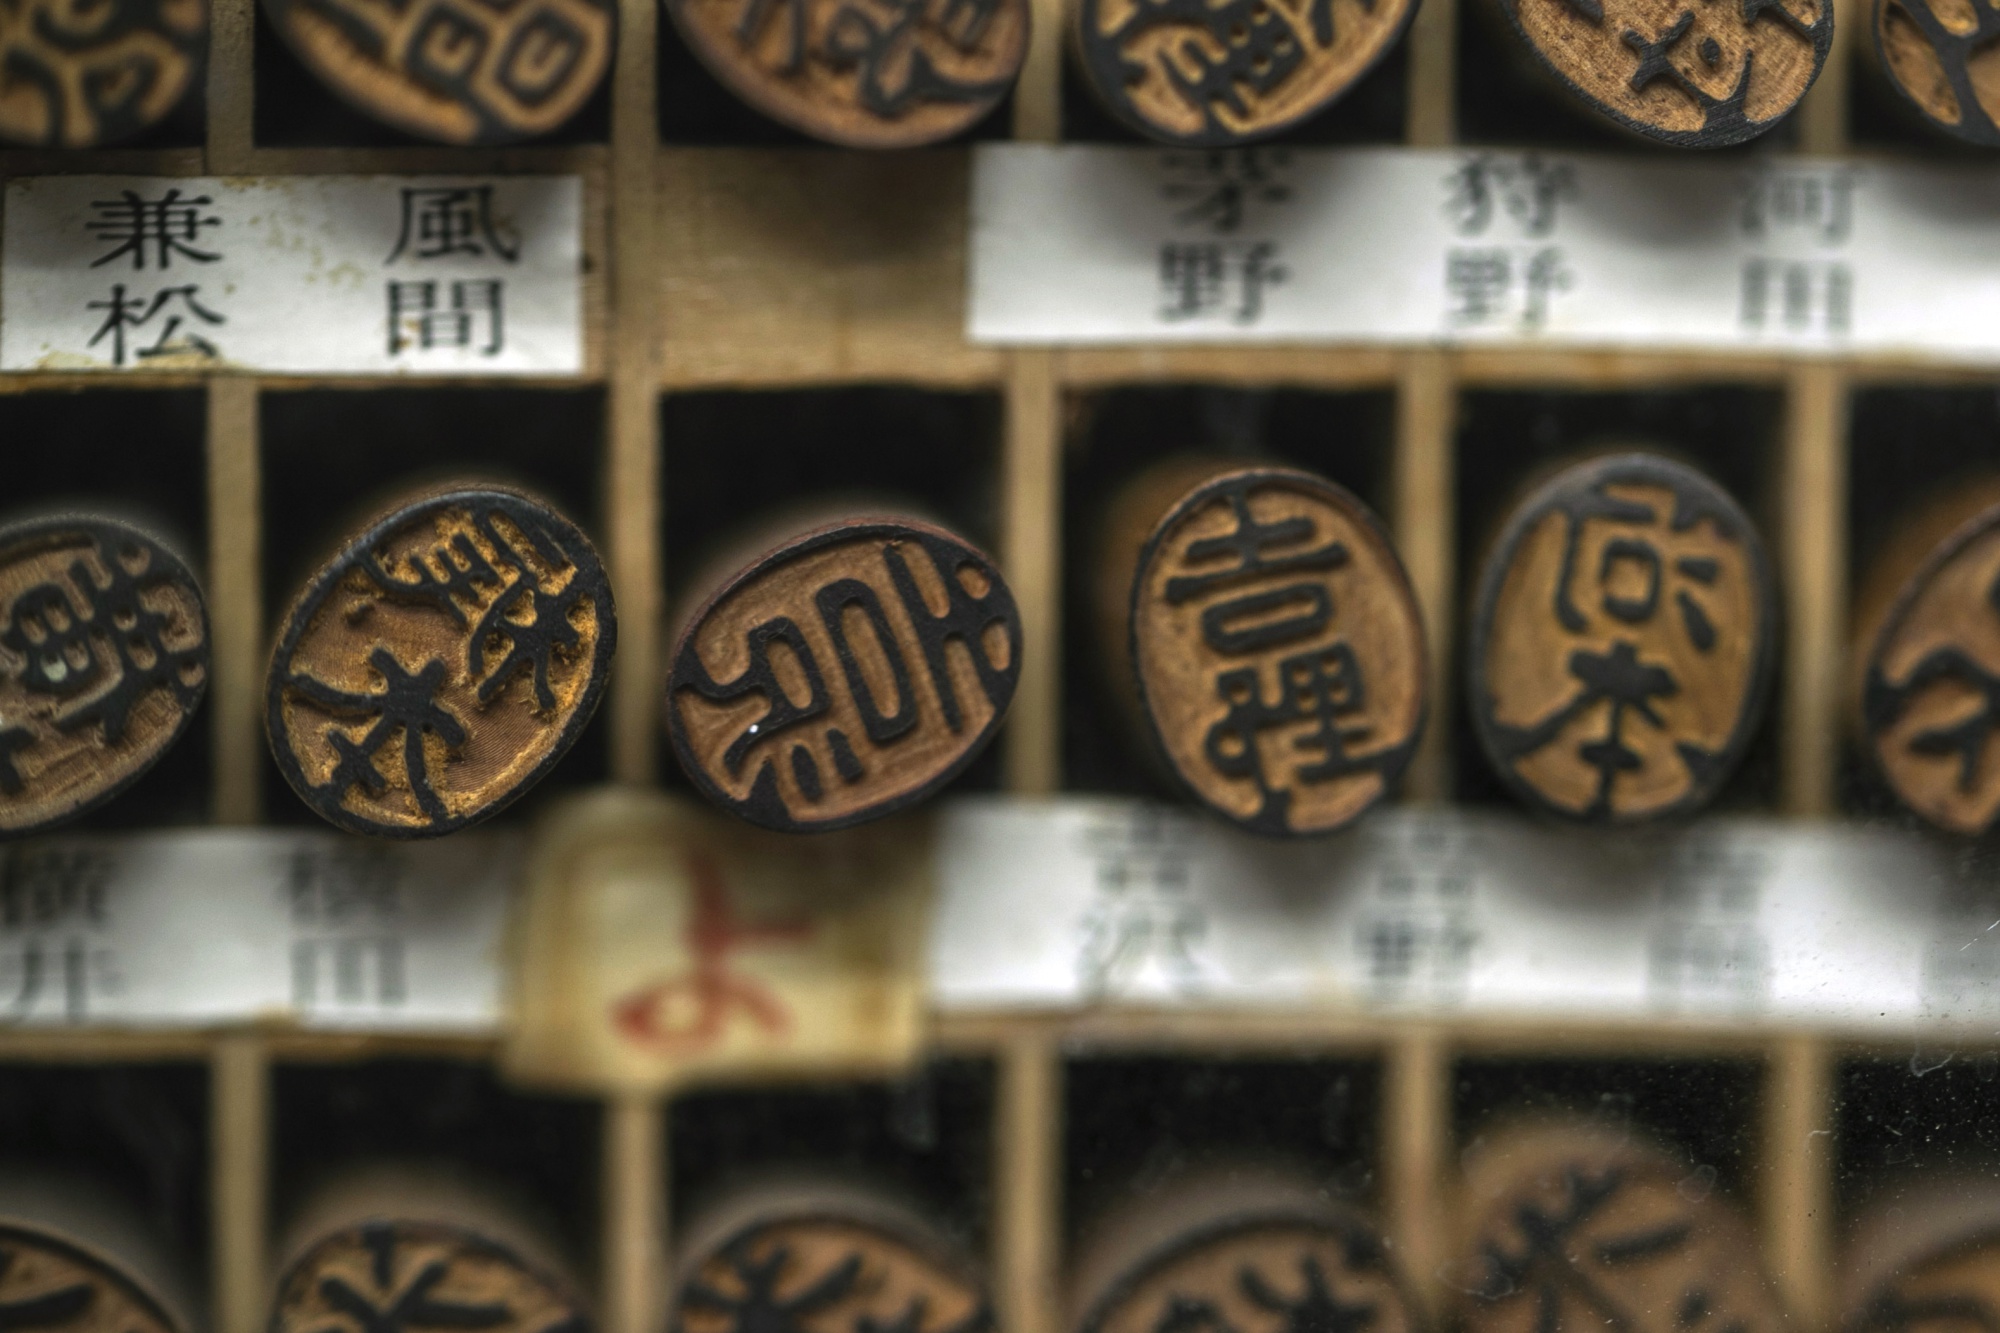 The Japan News by The Yomiuri Shimbun - Many companies in the IT world are  looking into alternatives to Japan's #hanko system of personalized stamps  for business transactions, as it requires the